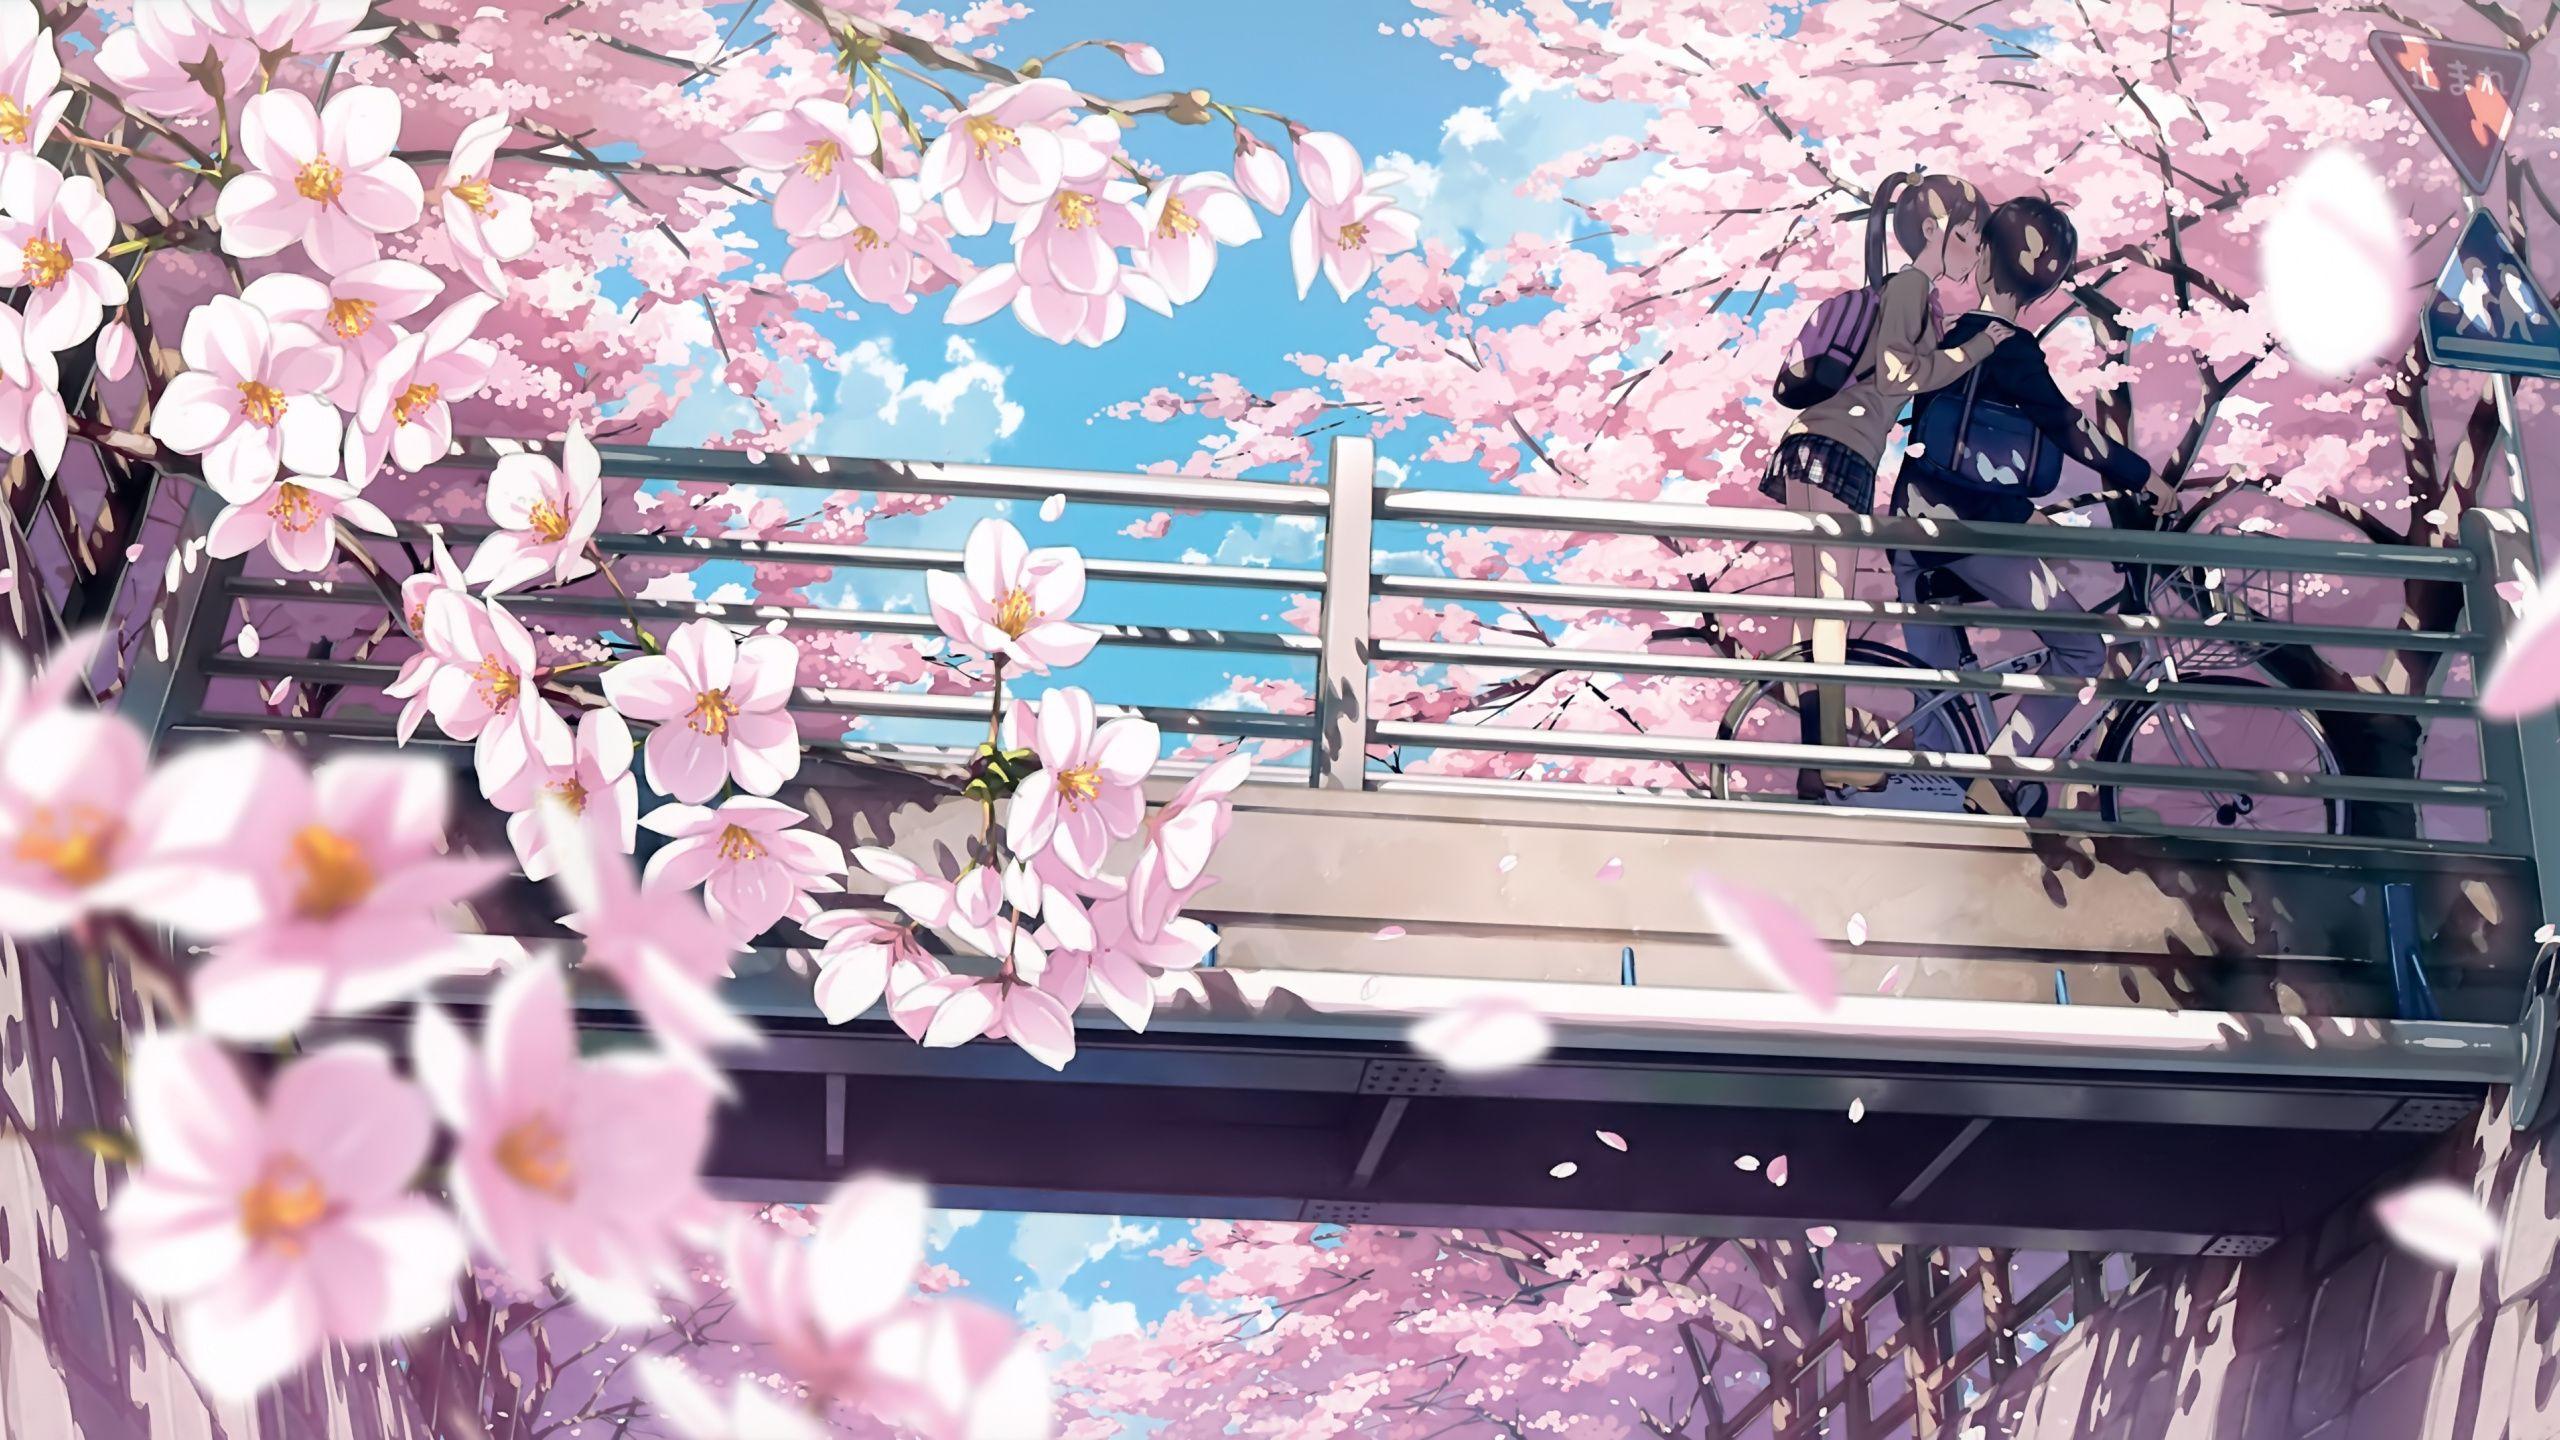 Your Lie in April Cherry Blossoms Wallpapers - Top Free ...